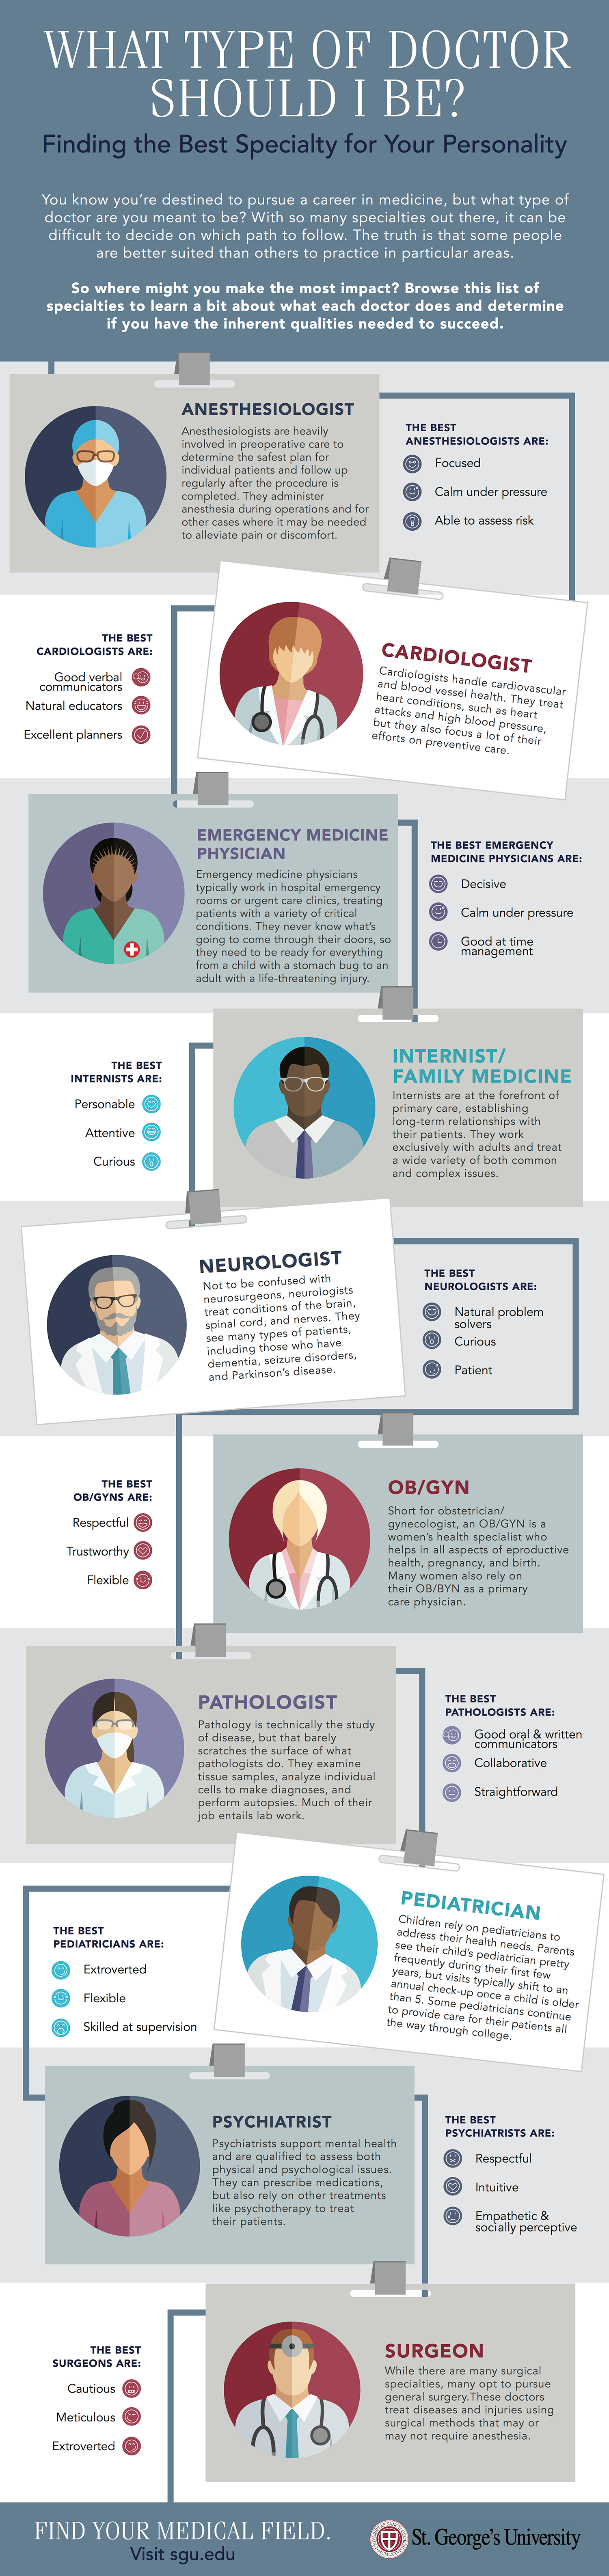 What Type Of Doctor Should I Be Finding The Best Specialty For Your Personality Infographic